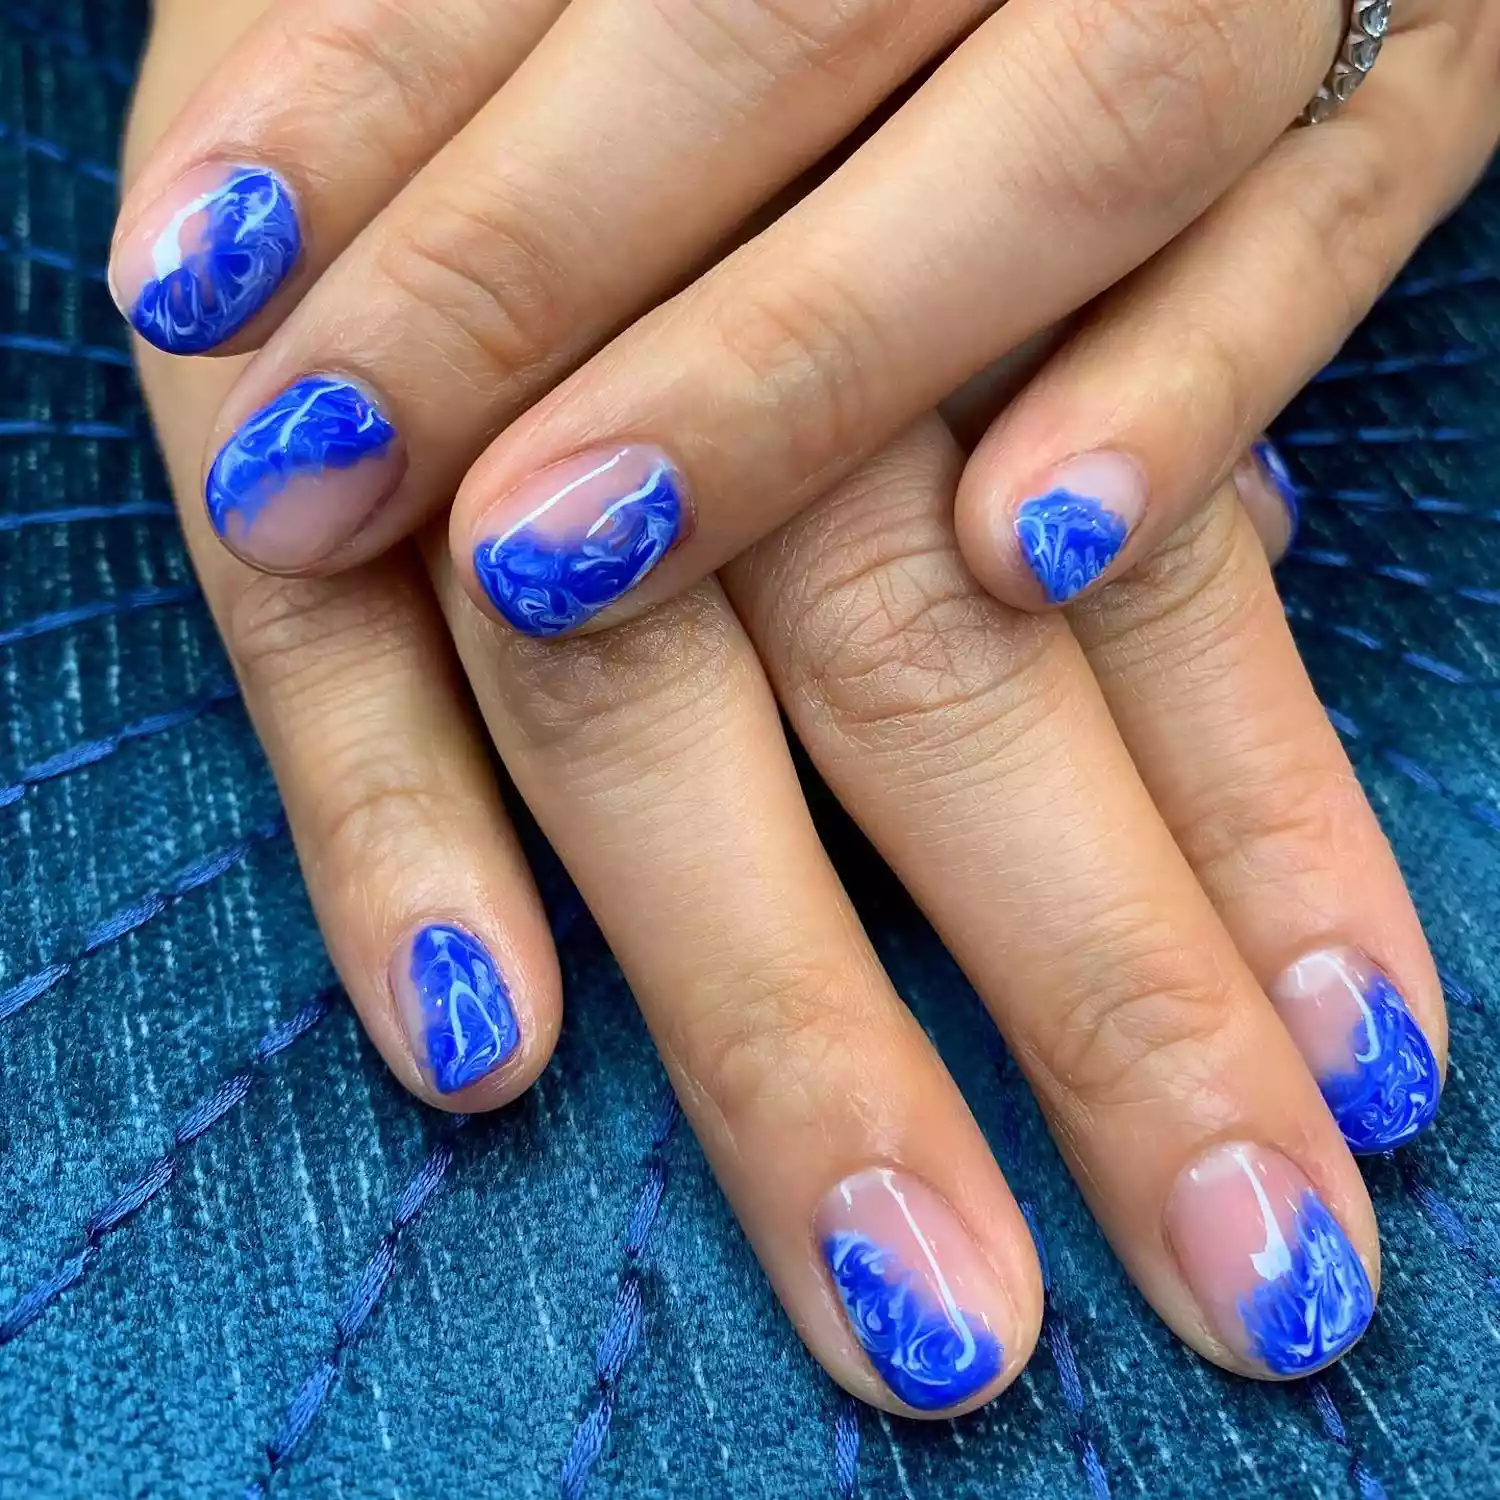 Manicure with blue and white marbled abstract wave designs on part of nails